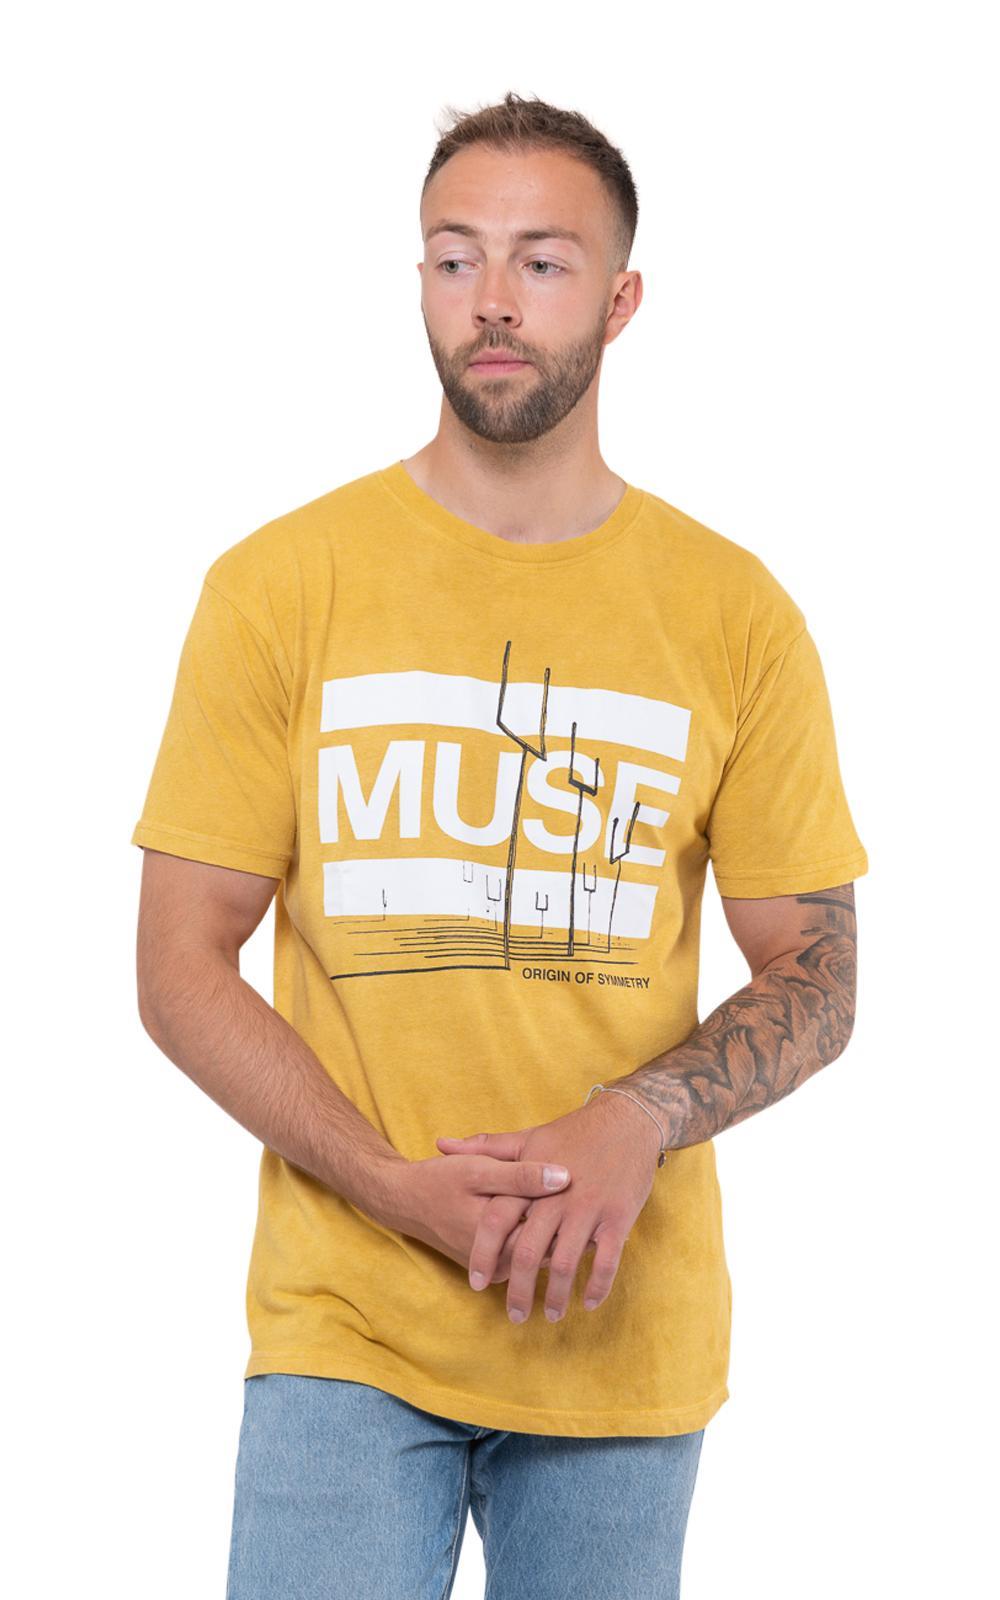 Muse T Shirt Origin of Symmetry new Official Mens Orange Yellow Mineral Wash